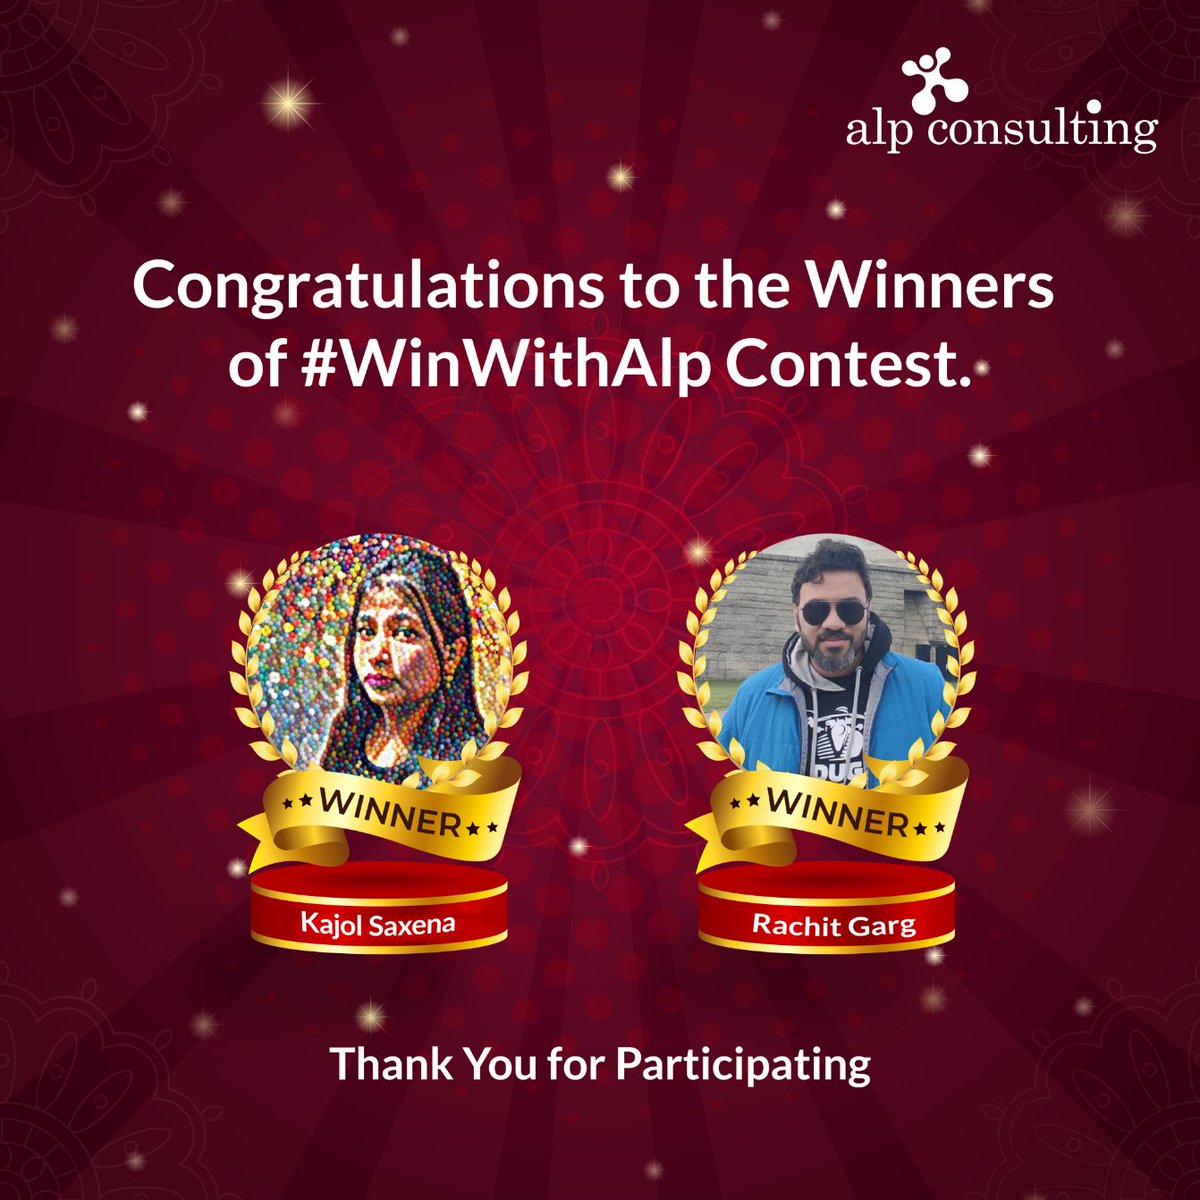 Congratulations to the winners of the #WinWithALP contest!

We kindly request you to DM us your Email ID and Phone Number. Thank you all for participating in a big way.

#Contest #ContestIndia #ContestWinner #WinWithALP